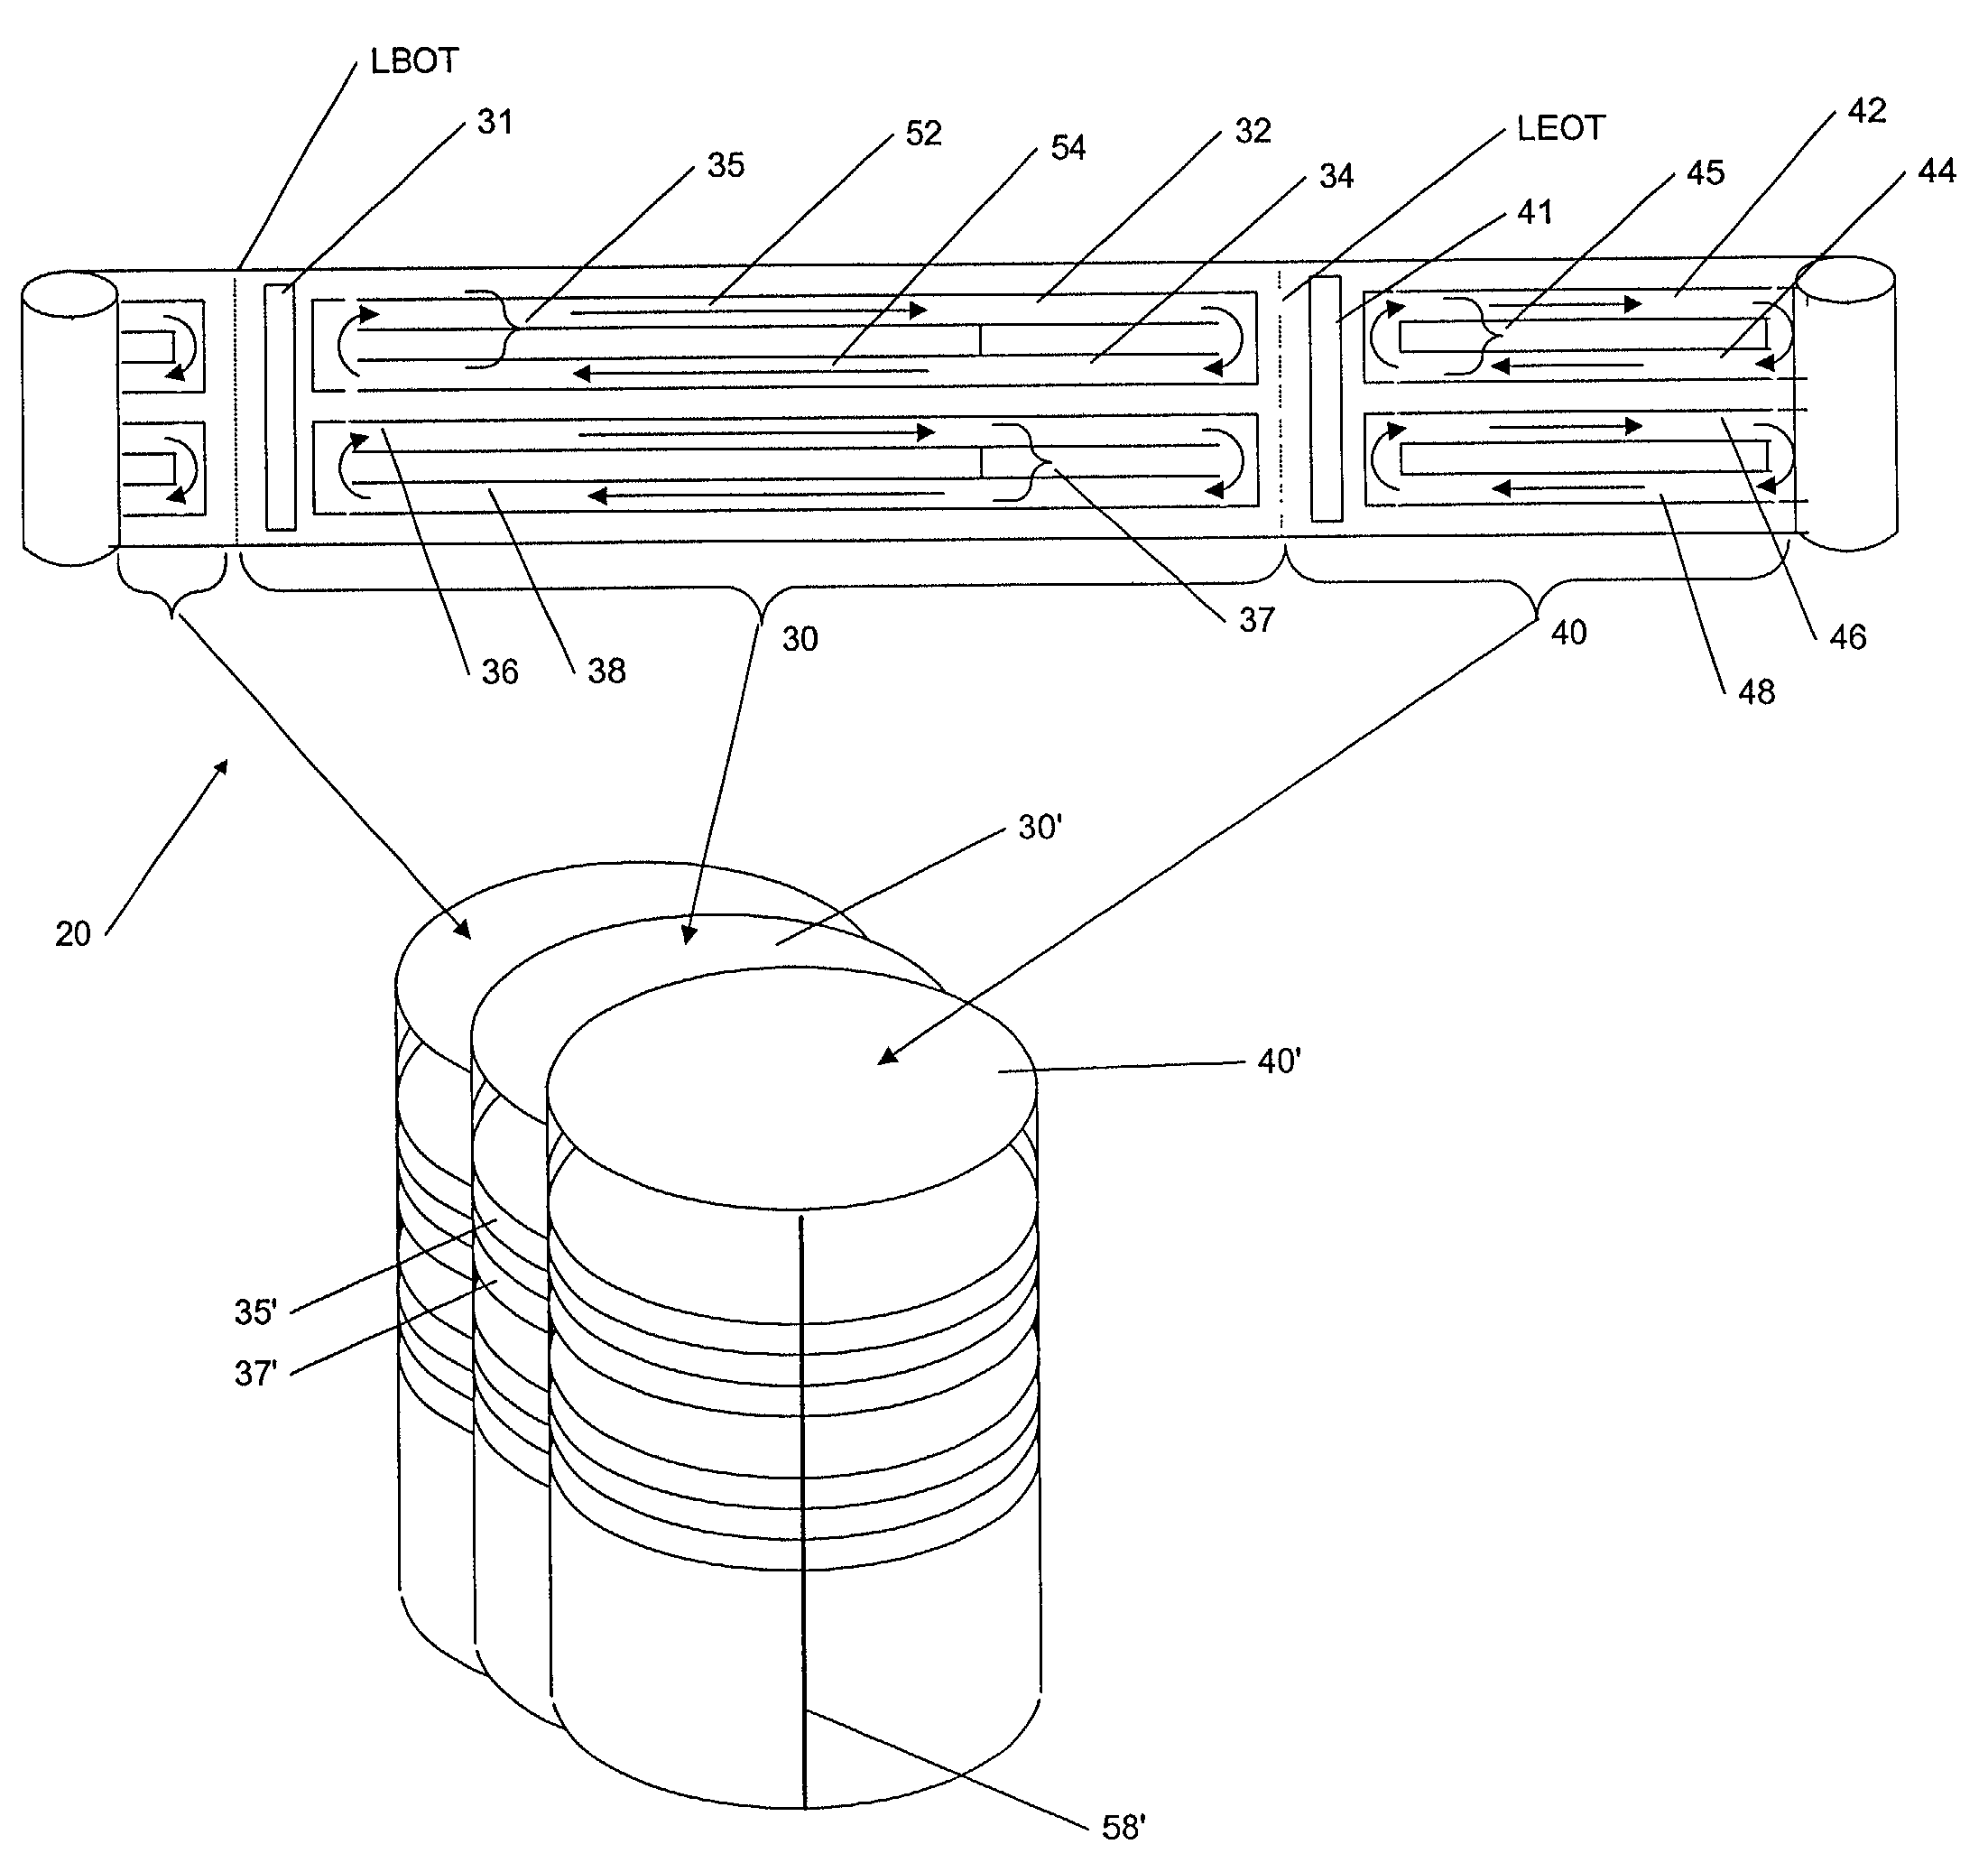 Data storage devices for large size data structures